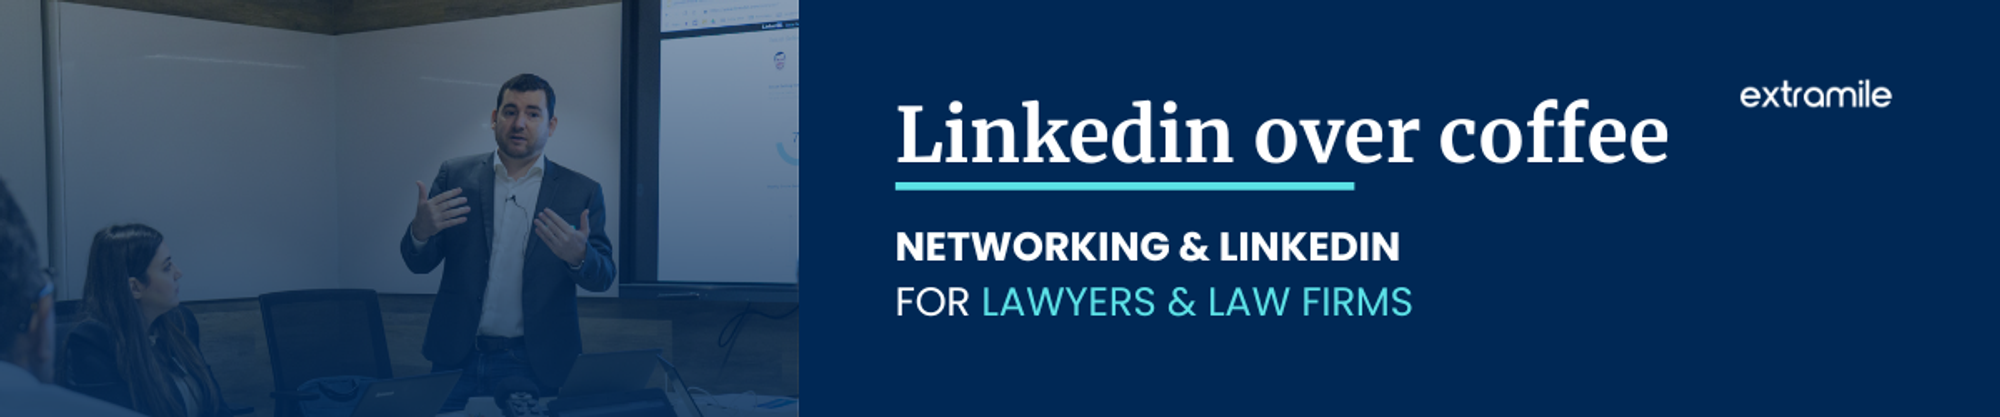 LinkedIn over coffee | Networking & Linkedin for Lawyer & Law firms